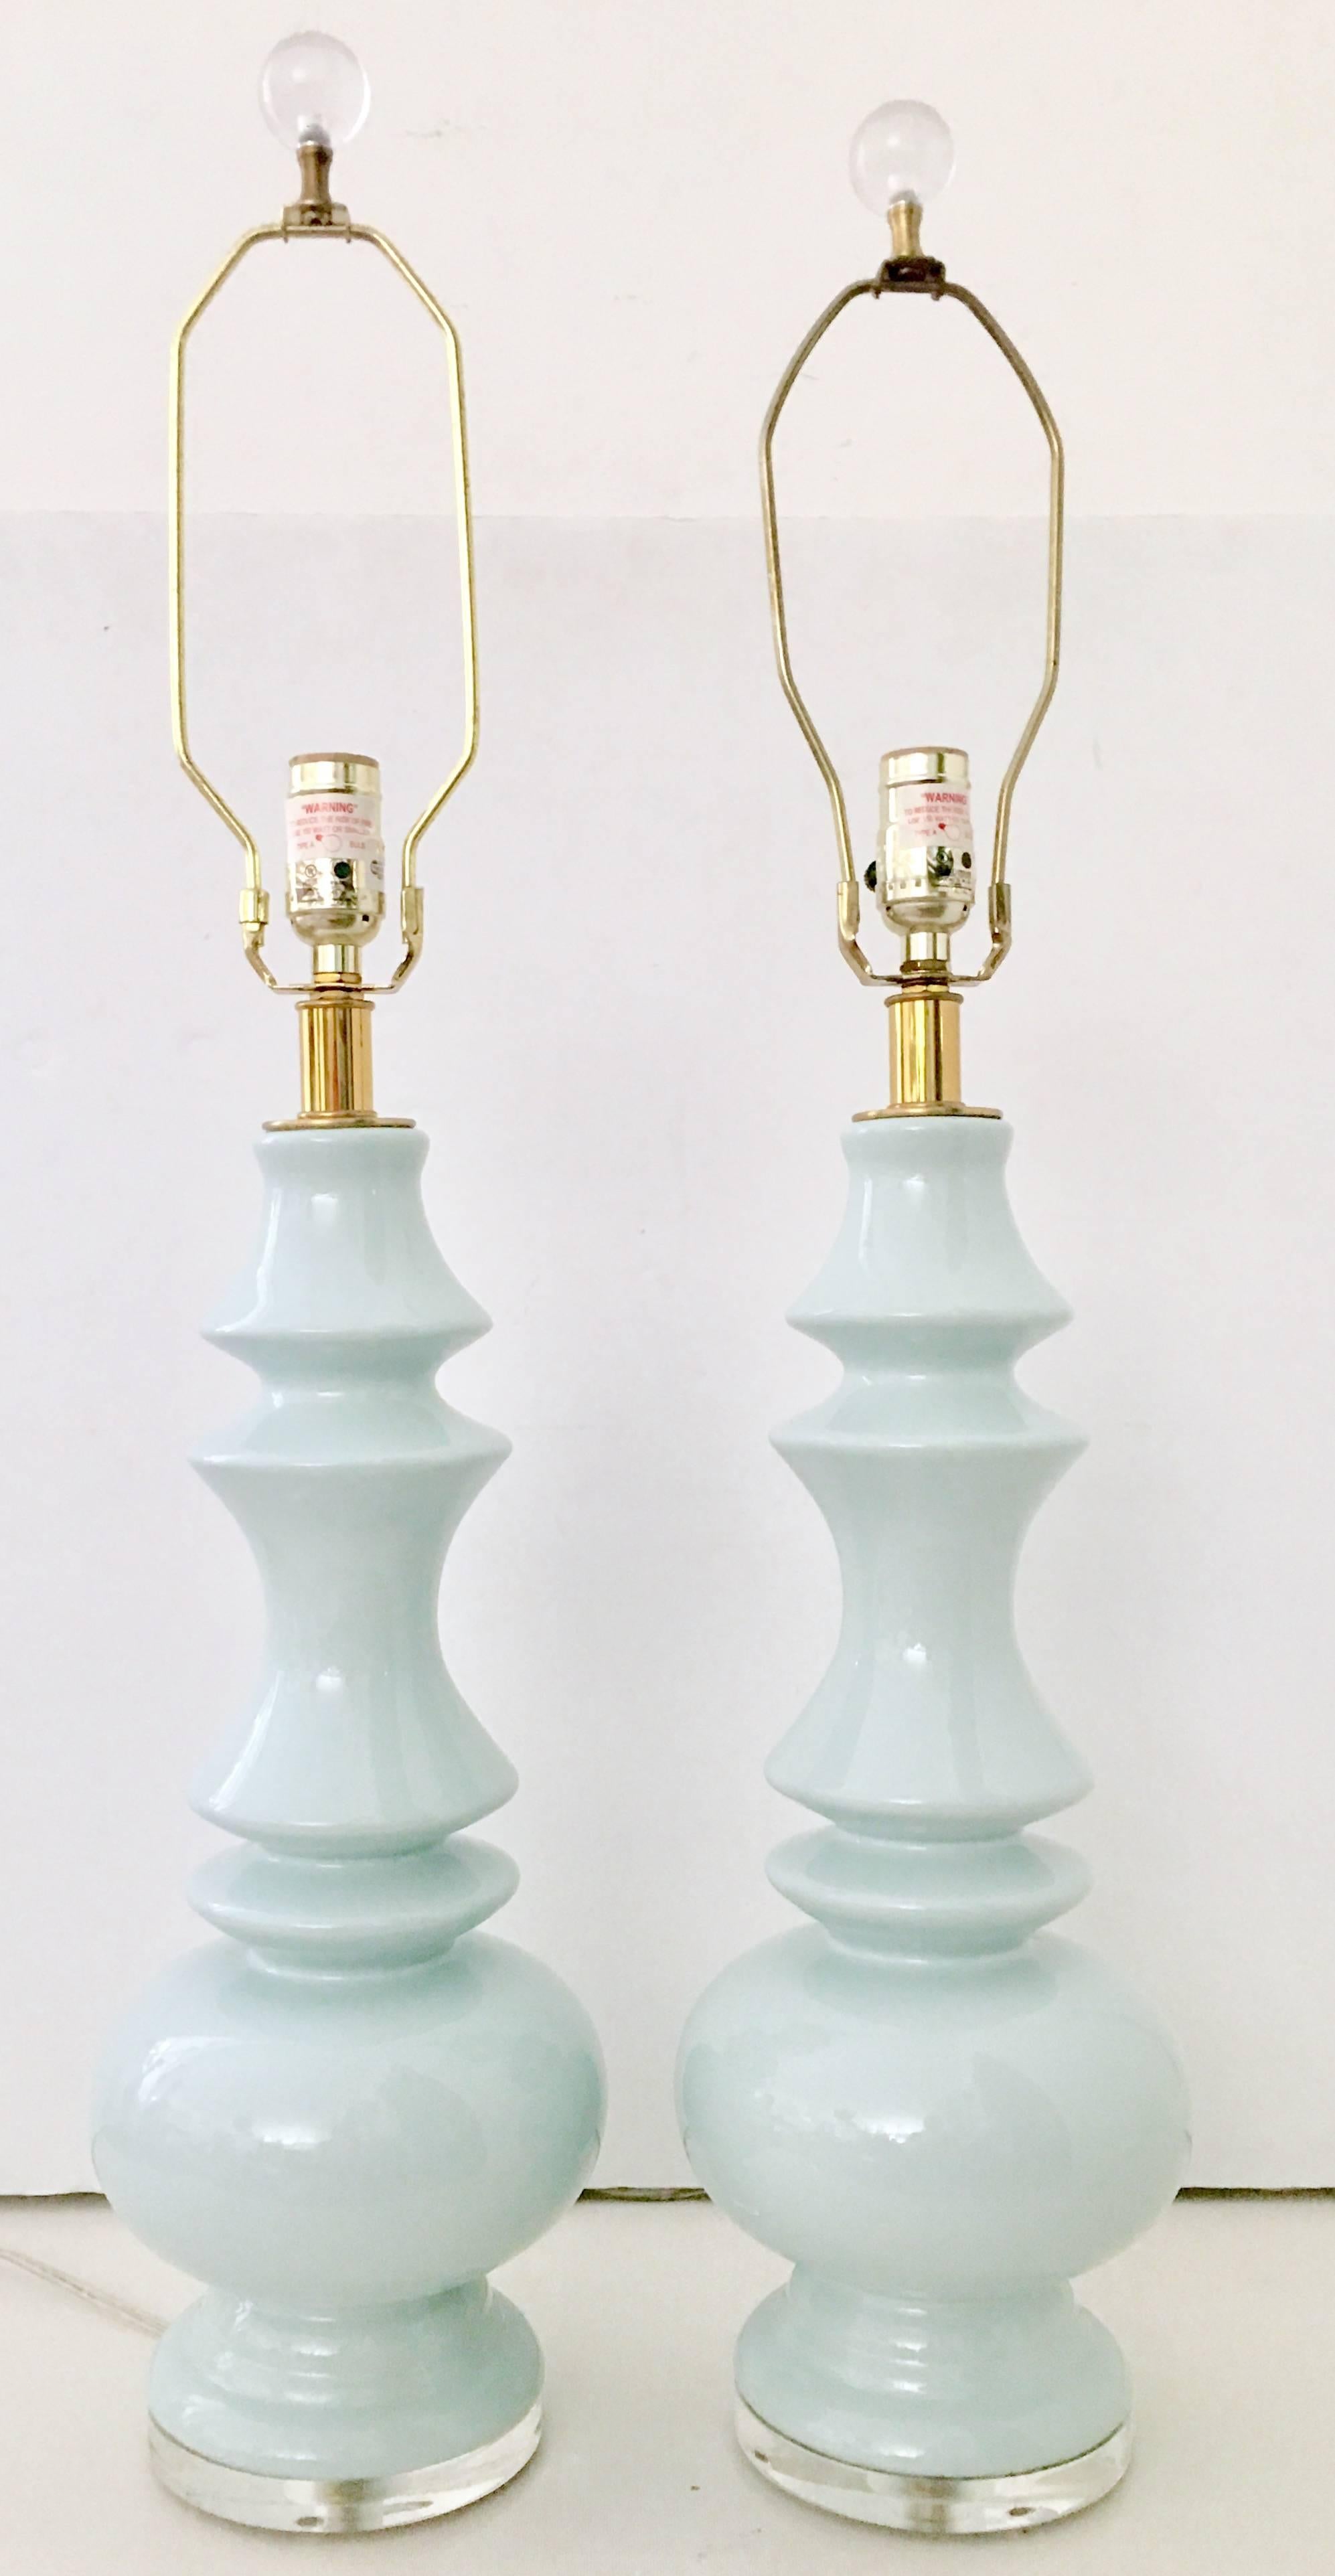 Pair of ceramic glaze robins egg blue "chess piece" form table lamps. Features a one inch Lucite base and brass fittings. Includes a pair of brass harps and Lucite round finials. Wired for the US and in working order.
Height to socket,